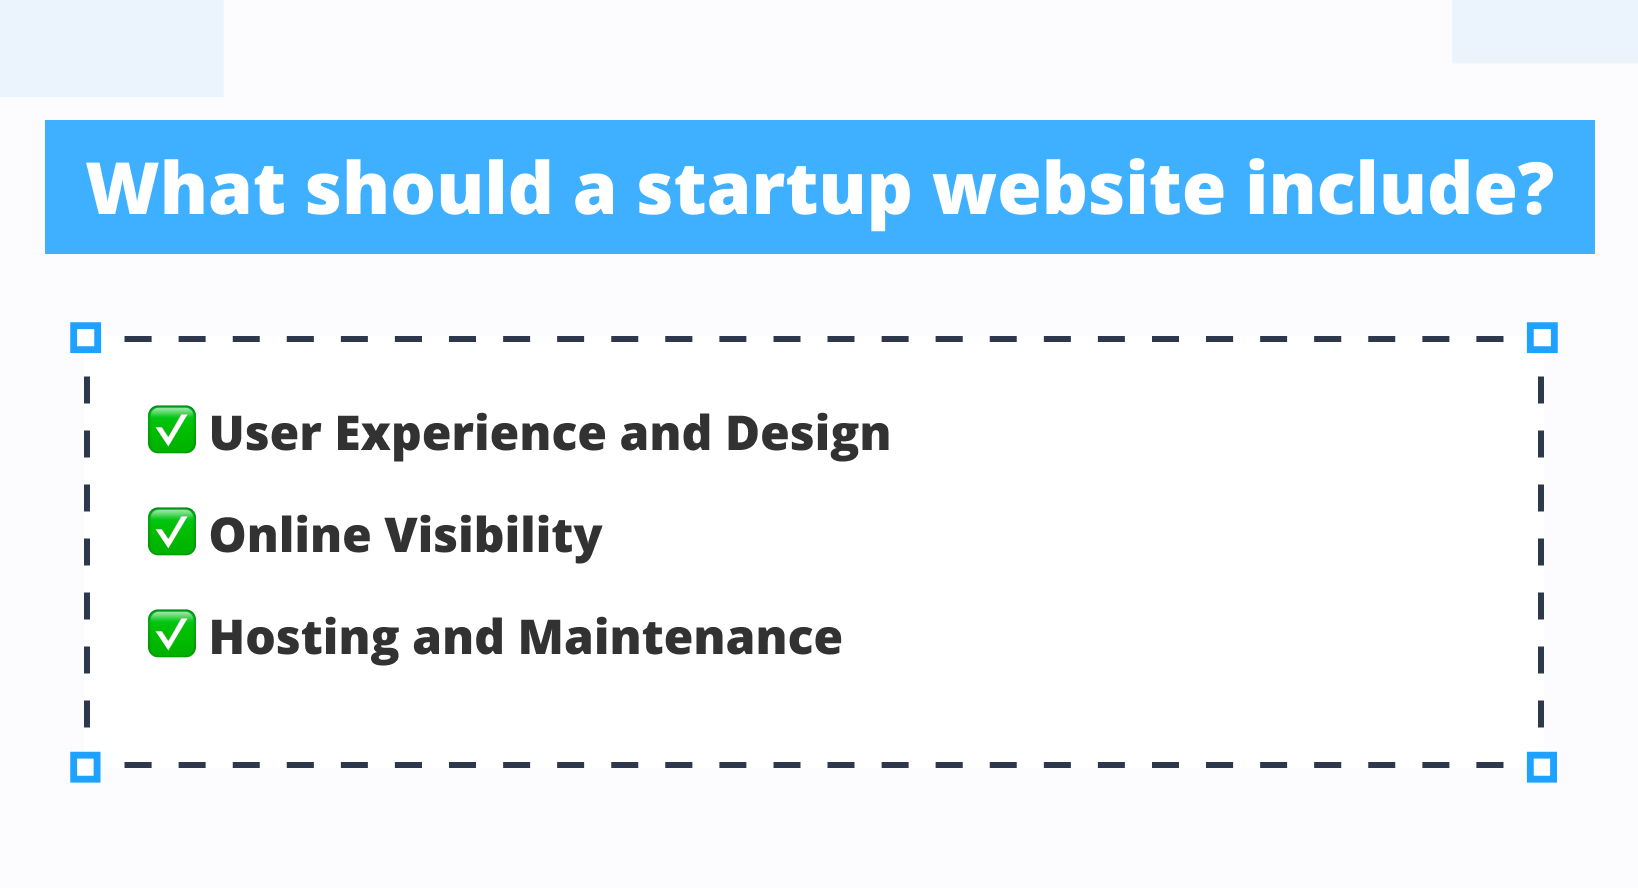 What should a startup website include?